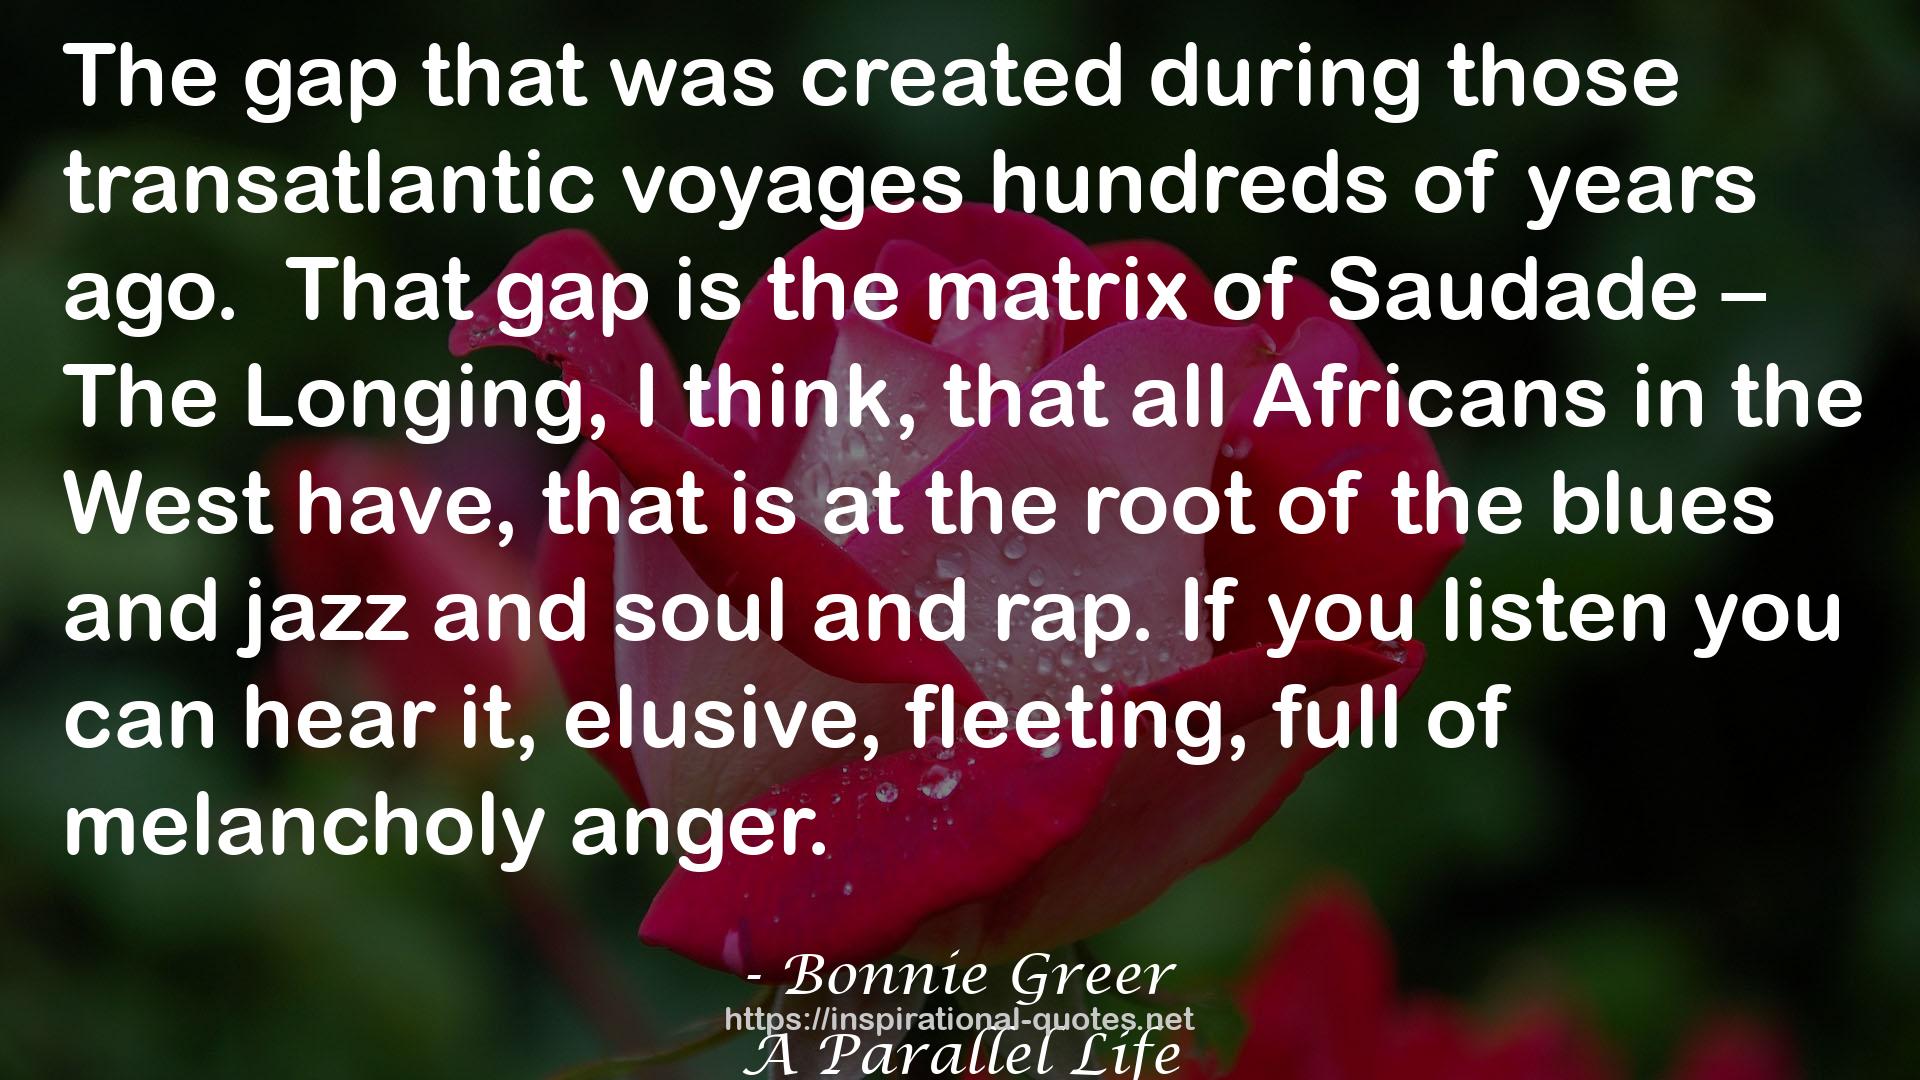 Bonnie Greer QUOTES